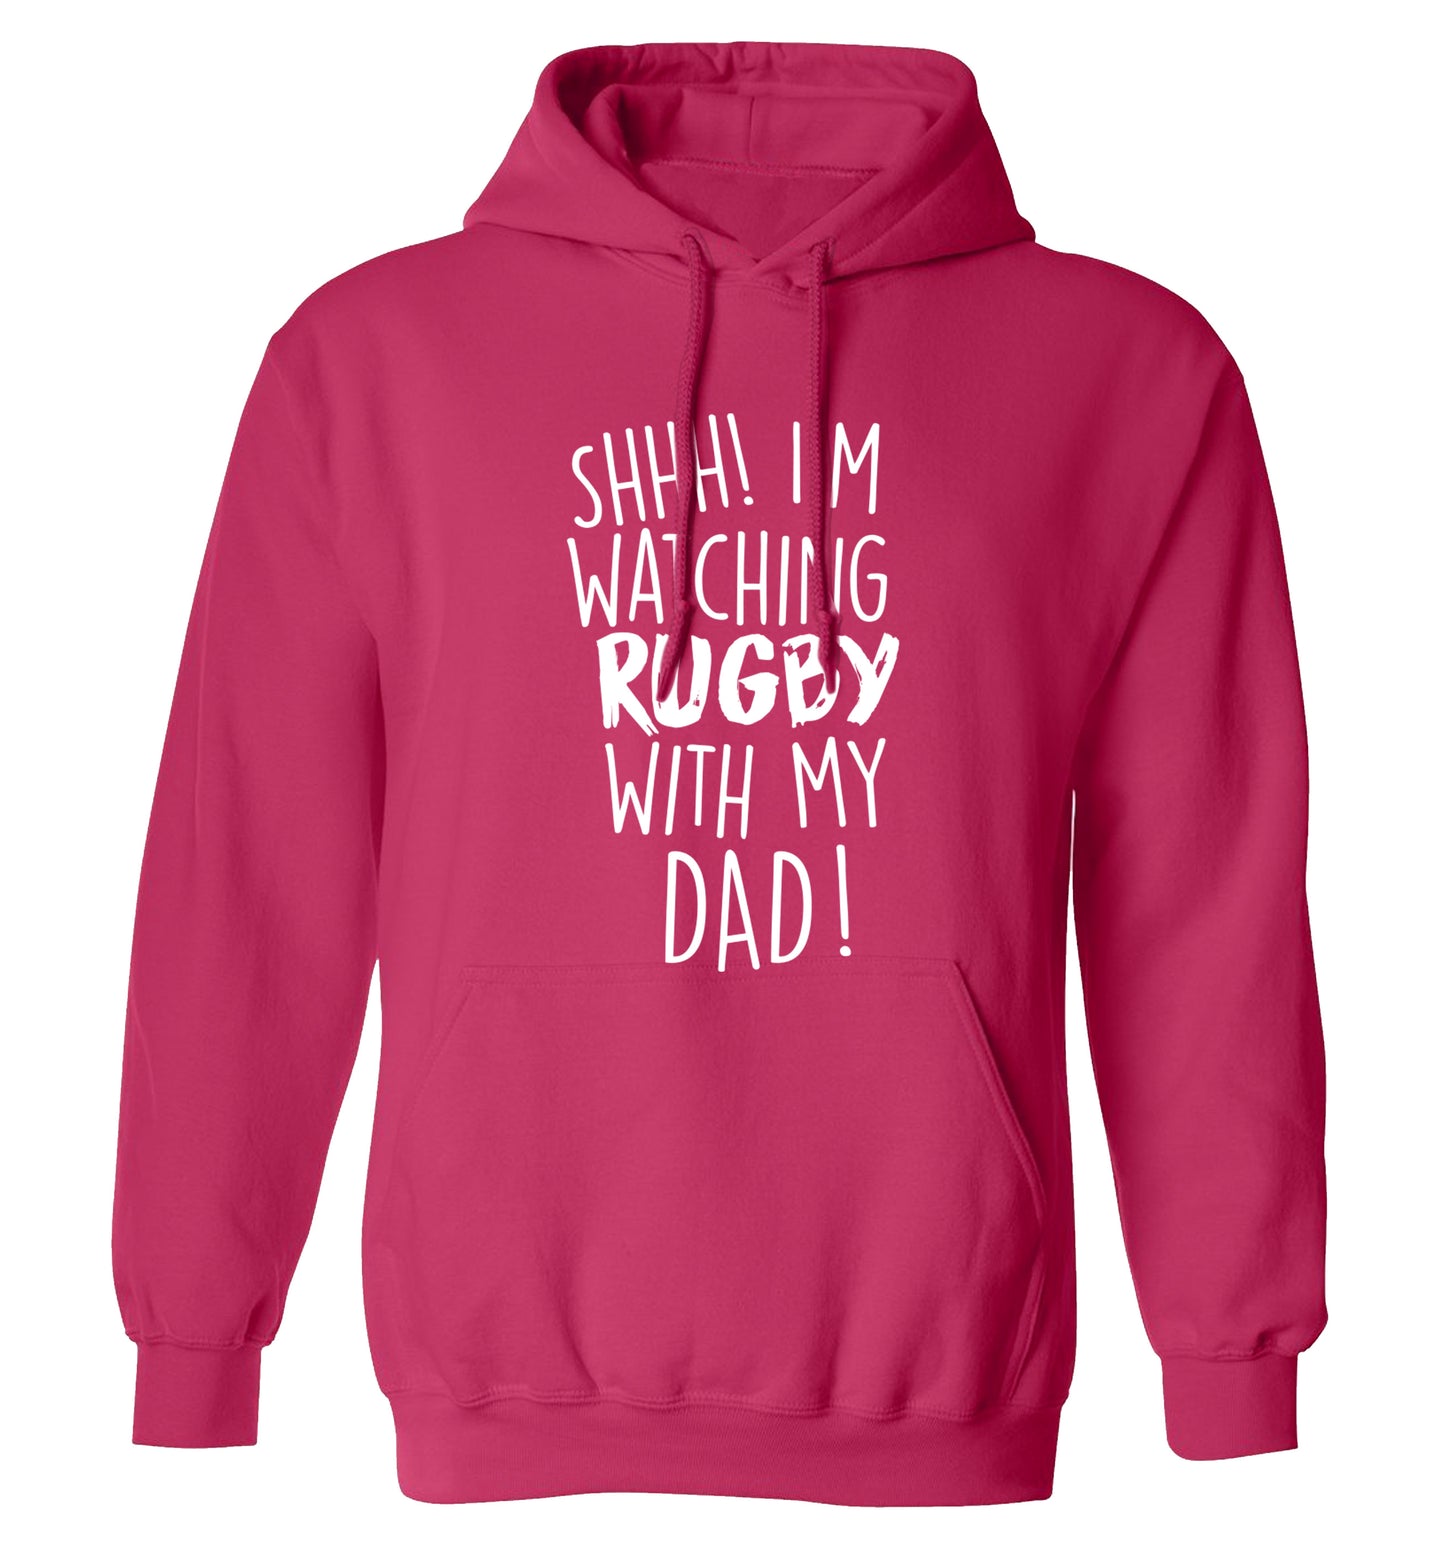 Shh... I'm watching rugby with my dad adults unisex pink hoodie 2XL